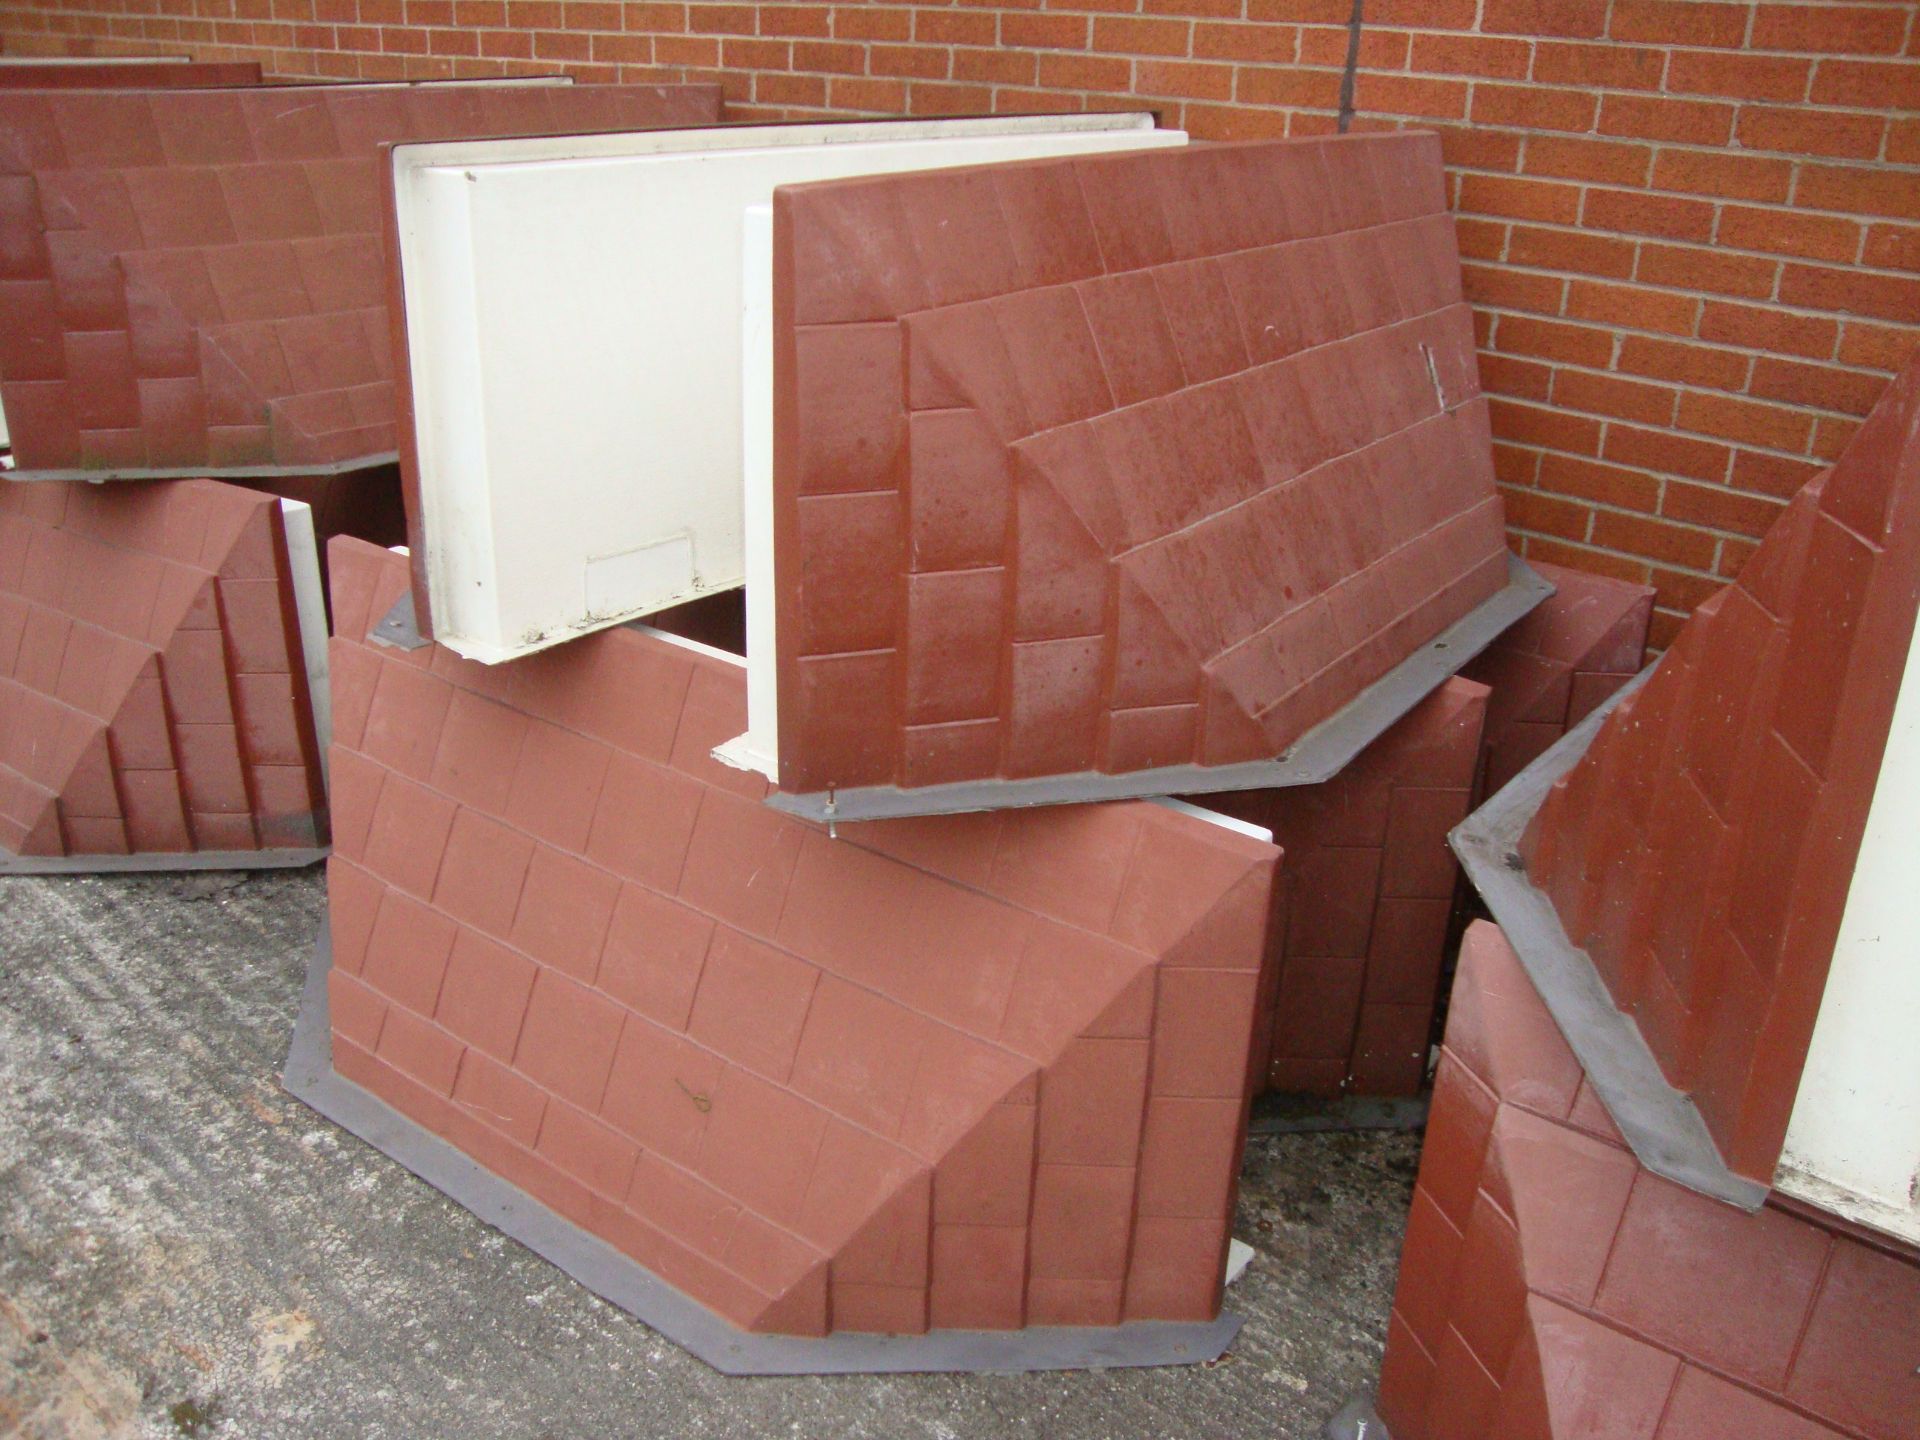 10 off canopies in brick red & white colour, each circa 1.66m wide, for exterior use above a - Image 3 of 4